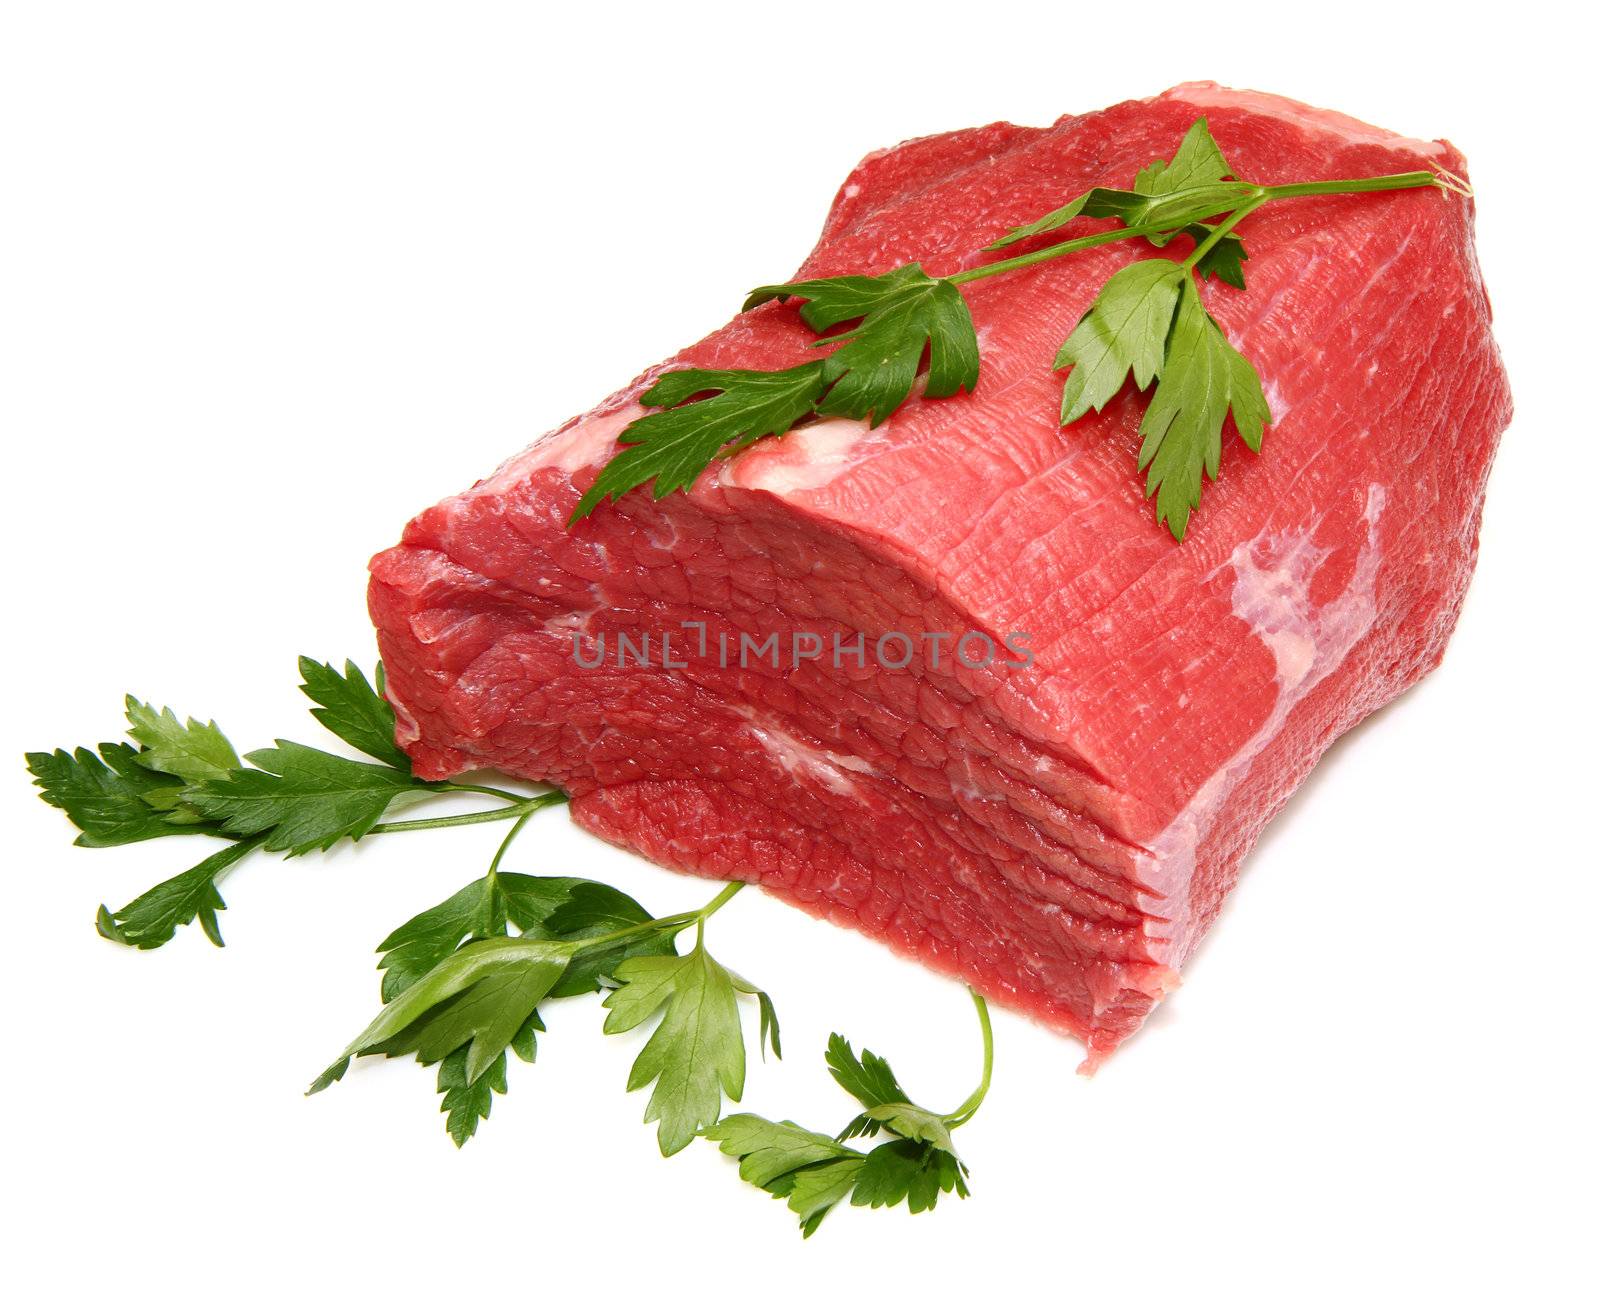 huge red meat chunk isolated over white background